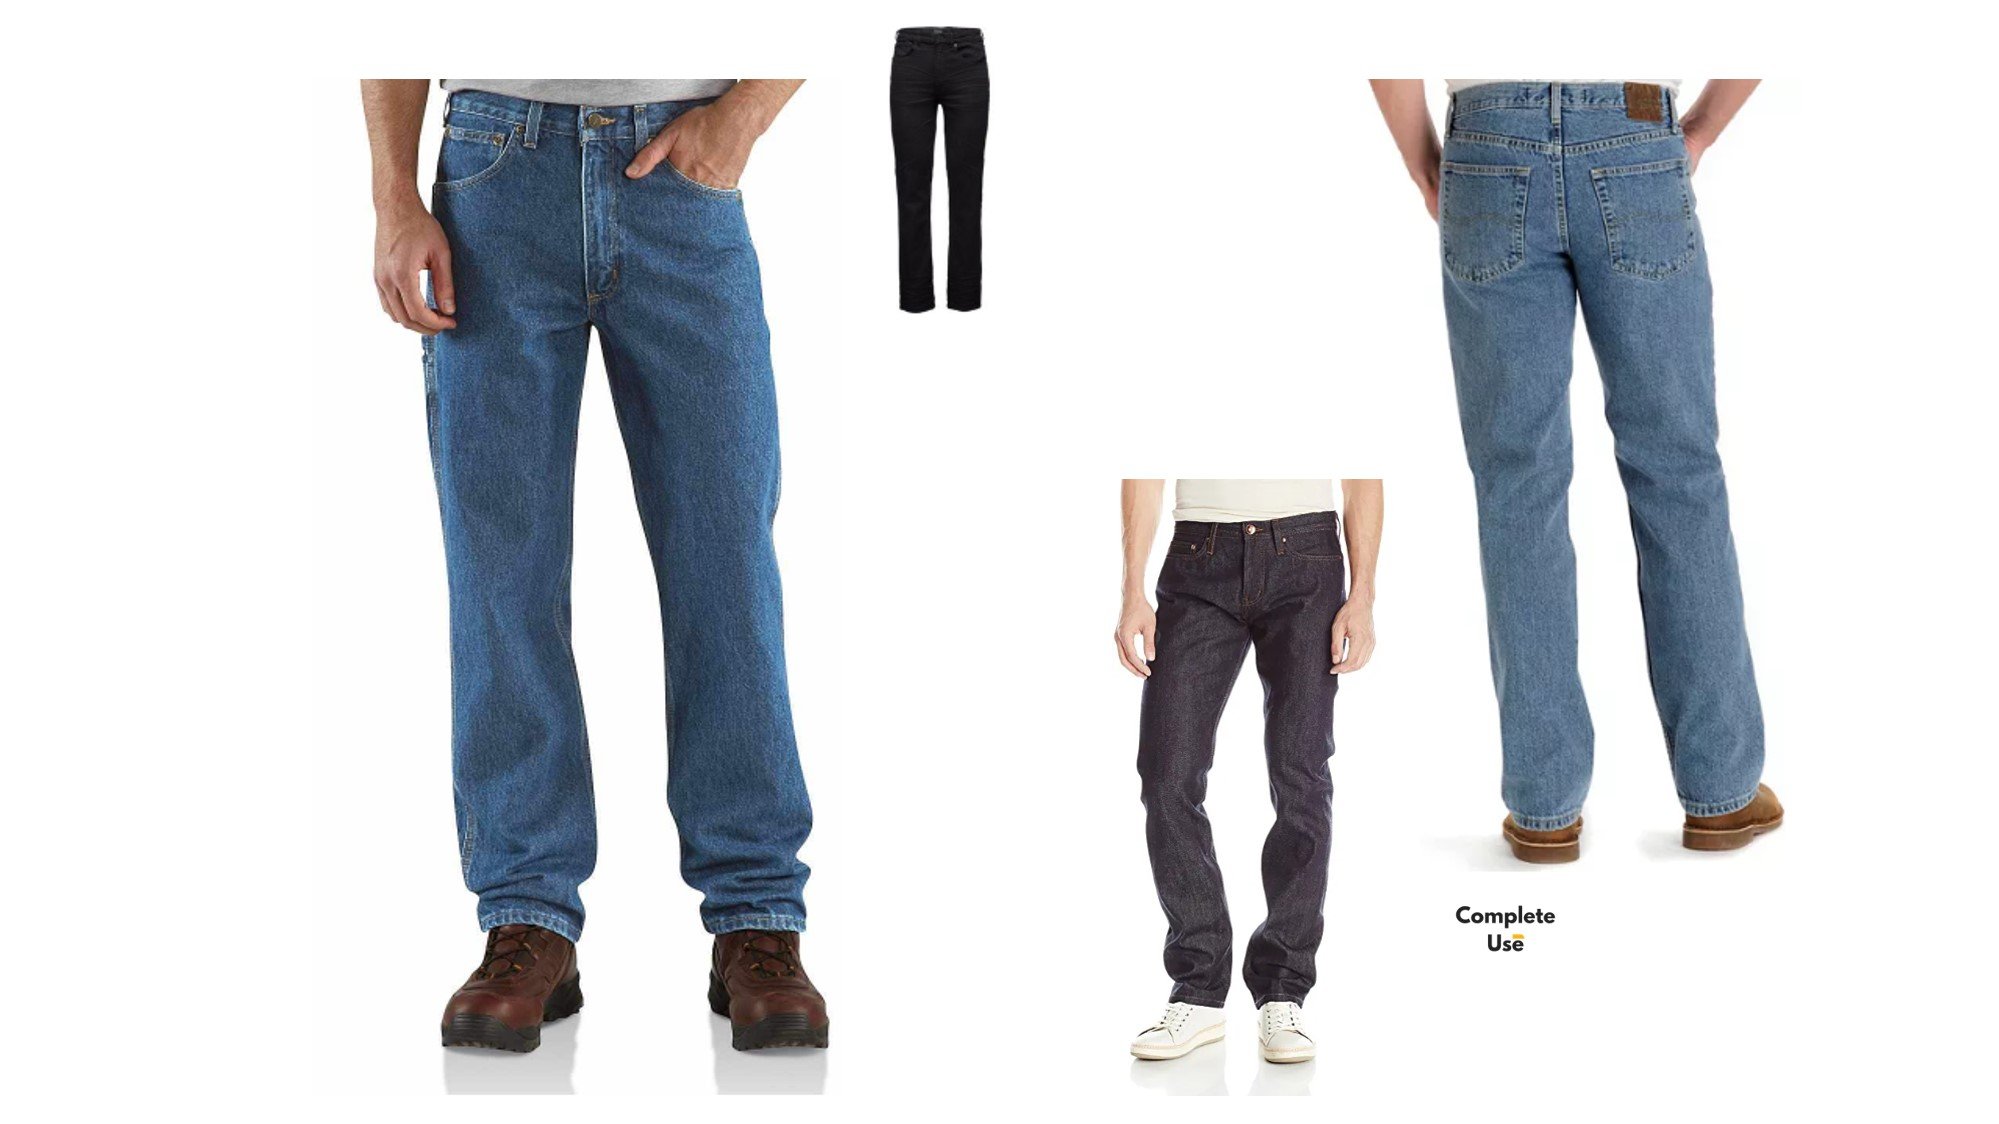 Top 5 Most Durable Jeans in the World - Complete Use